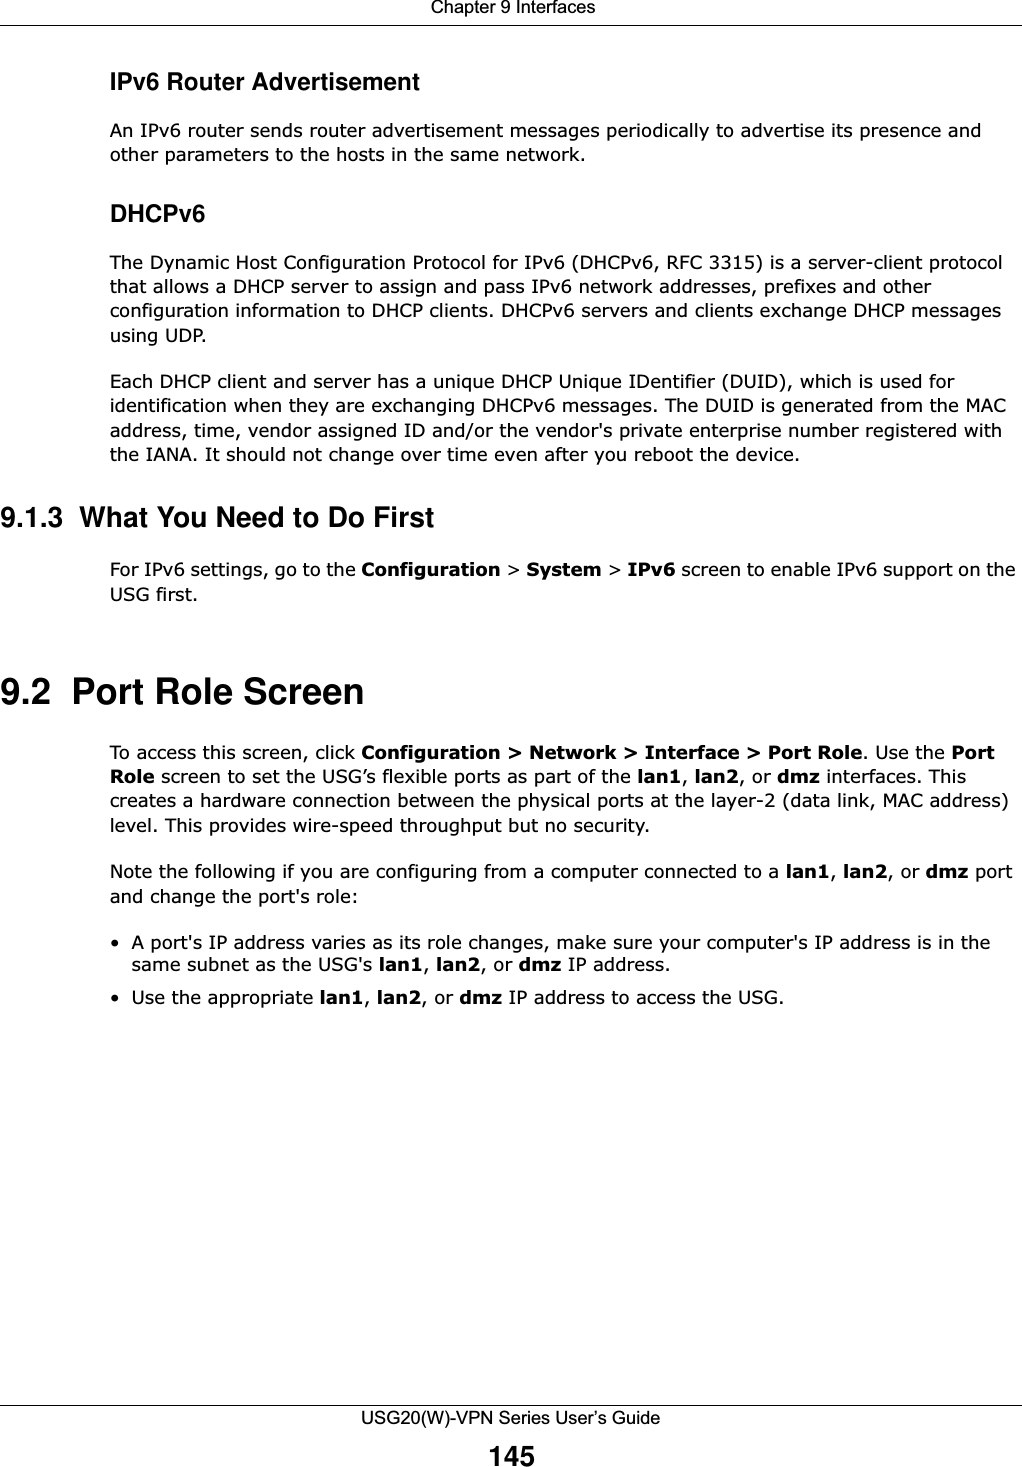  Chapter 9 InterfacesUSG20(W)-VPN Series User’s Guide145IPv6 Router AdvertisementAn IPv6 router sends router advertisement messages periodically to advertise its presence and other parameters to the hosts in the same network.DHCPv6The Dynamic Host Configuration Protocol for IPv6 (DHCPv6, RFC 3315) is a server-client protocol that allows a DHCP server to assign and pass IPv6 network addresses, prefixes and other configuration information to DHCP clients. DHCPv6 servers and clients exchange DHCP messages using UDP.Each DHCP client and server has a unique DHCP Unique IDentifier (DUID), which is used for identification when they are exchanging DHCPv6 messages. The DUID is generated from the MAC address, time, vendor assigned ID and/or the vendor&apos;s private enterprise number registered with the IANA. It should not change over time even after you reboot the device.9.1.3  What You Need to Do First For IPv6 settings, go to the Configuration &gt; System &gt; IPv6 screen to enable IPv6 support on the USG first.9.2  Port Role ScreenTo access this screen, click Configuration &gt; Network &gt; Interface &gt; Port Role. Use the PortRole screen to set the USG’s flexible ports as part of the lan1, lan2, or dmz interfaces. This creates a hardware connection between the physical ports at the layer-2 (data link, MAC address) level. This provides wire-speed throughput but no security.Note the following if you are configuring from a computer connected to a lan1, lan2, or dmz port and change the port&apos;s role:• A port&apos;s IP address varies as its role changes, make sure your computer&apos;s IP address is in the same subnet as the USG&apos;s lan1, lan2, or dmz IP address.• Use the appropriate lan1, lan2, or dmz IP address to access the USG.